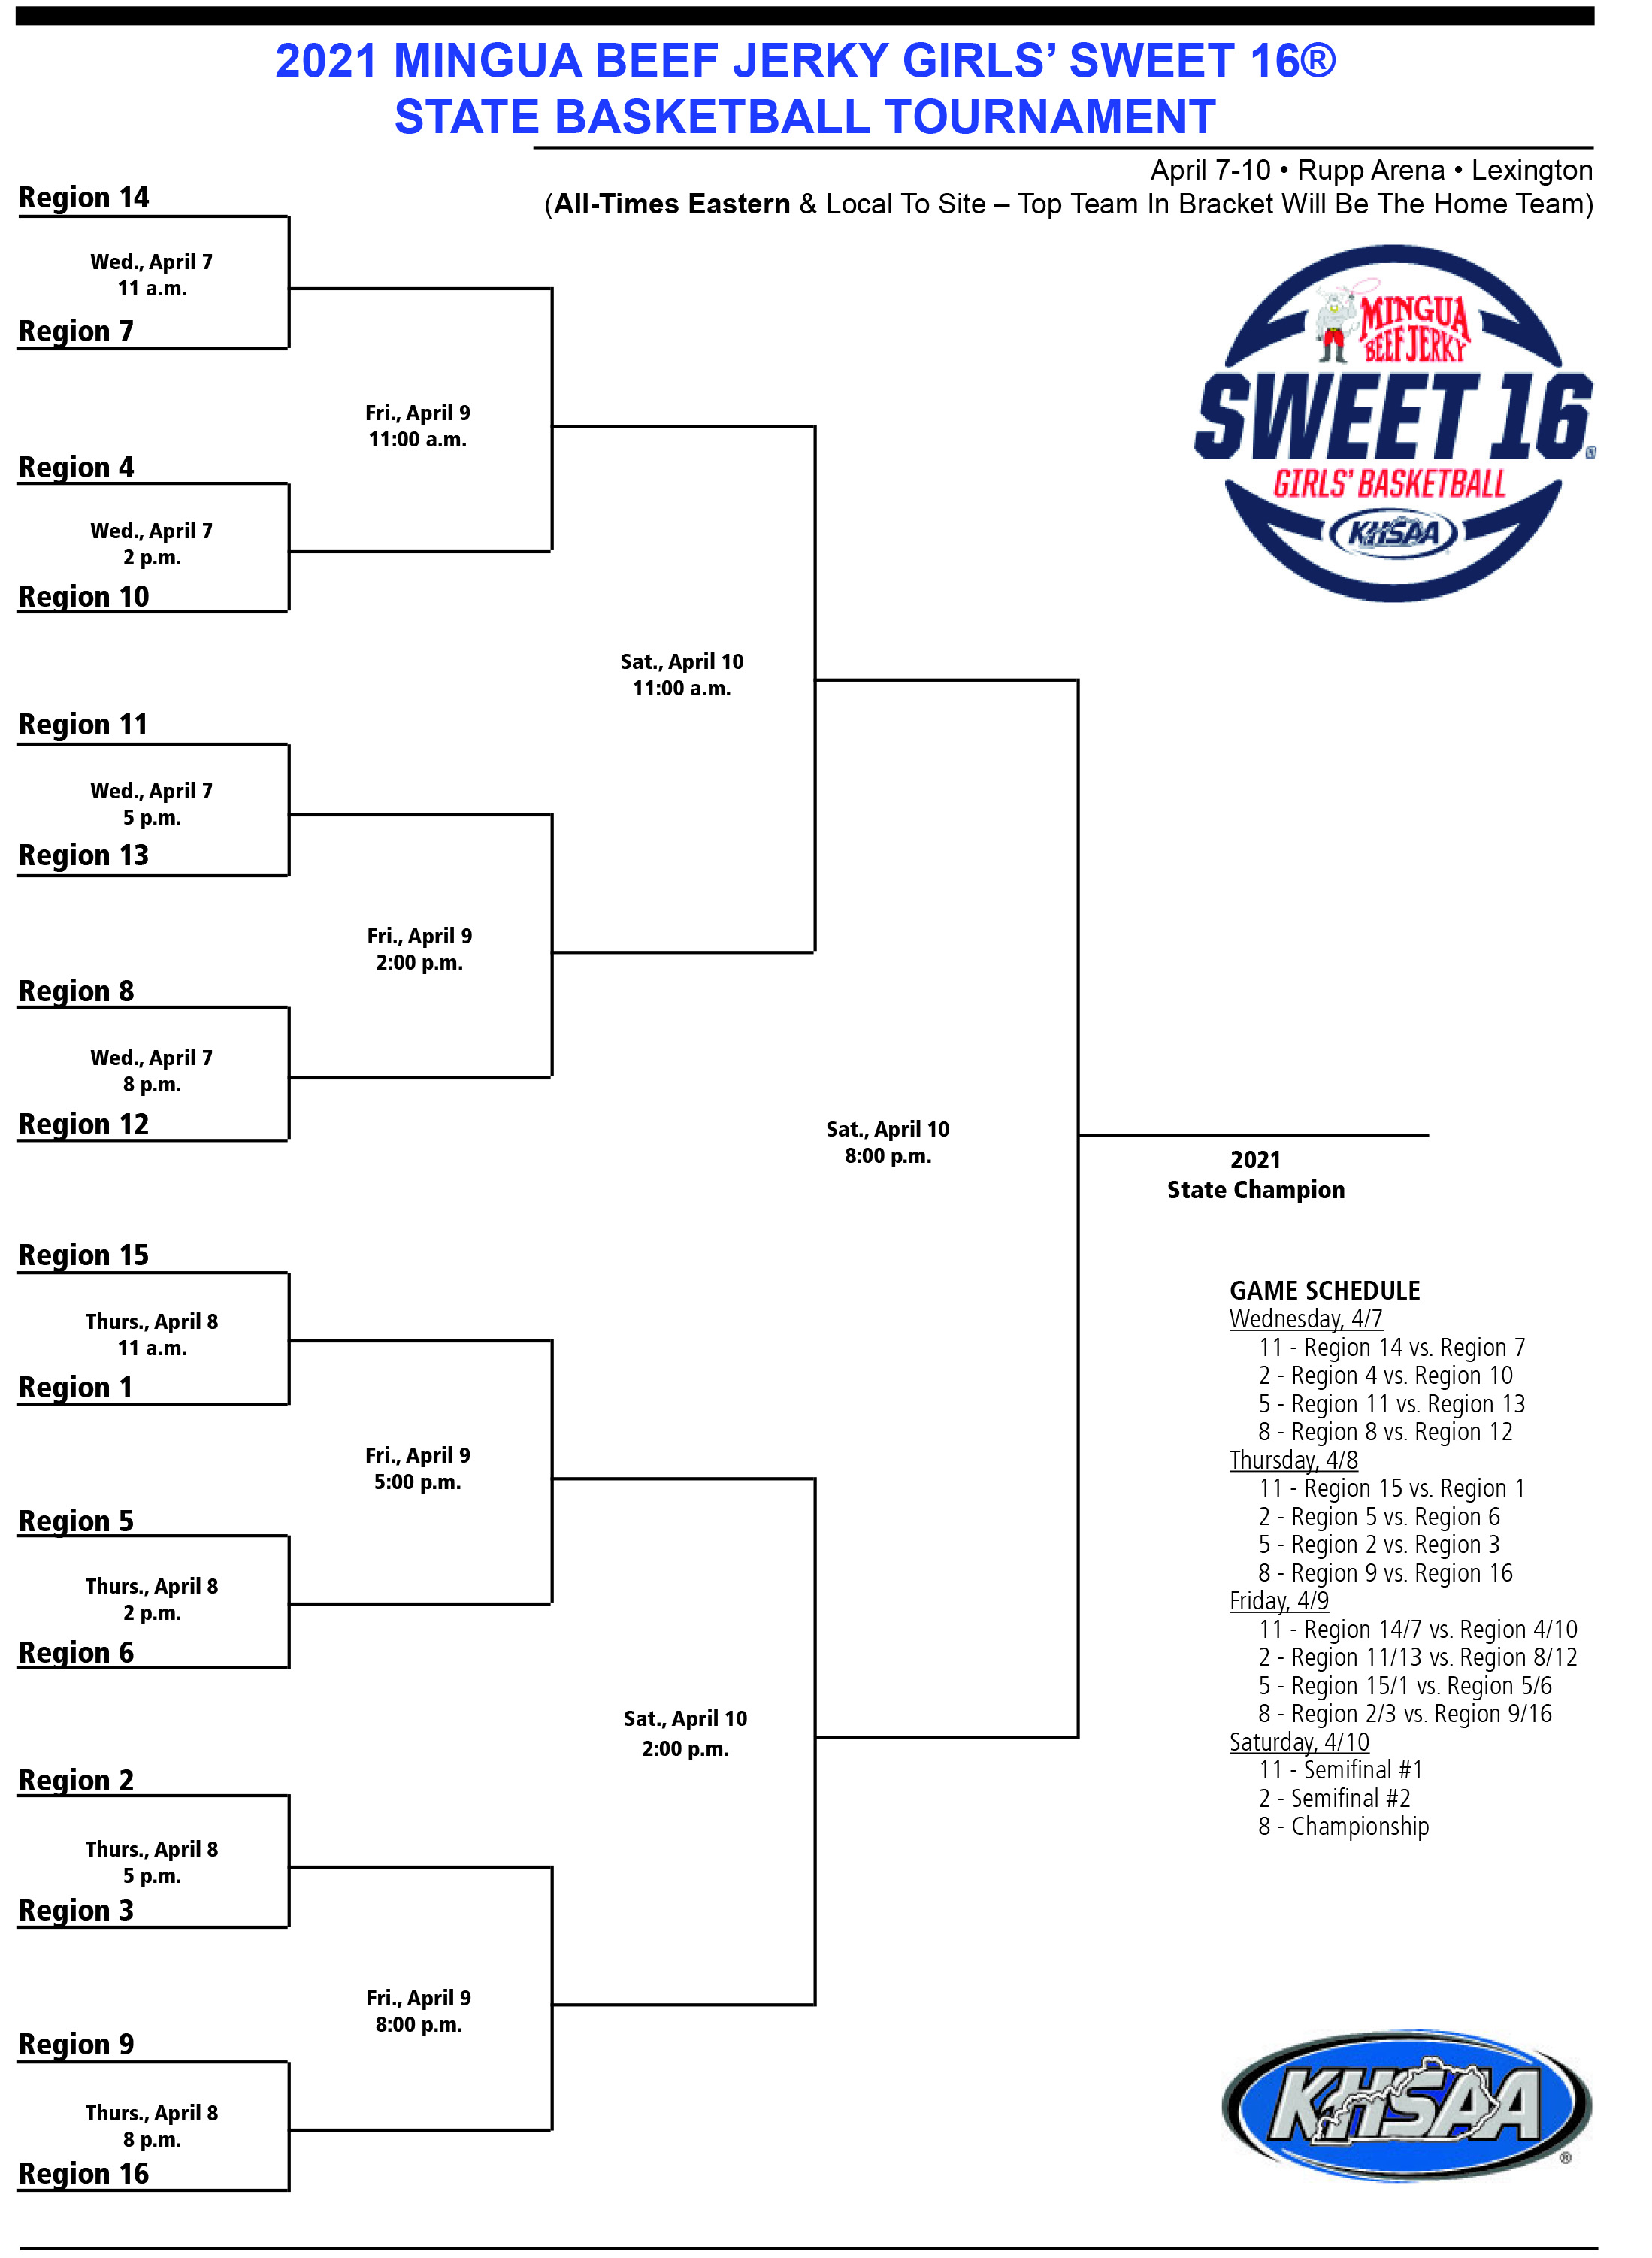 College basketball's 'greatest of all time' bracket - Sweet 16